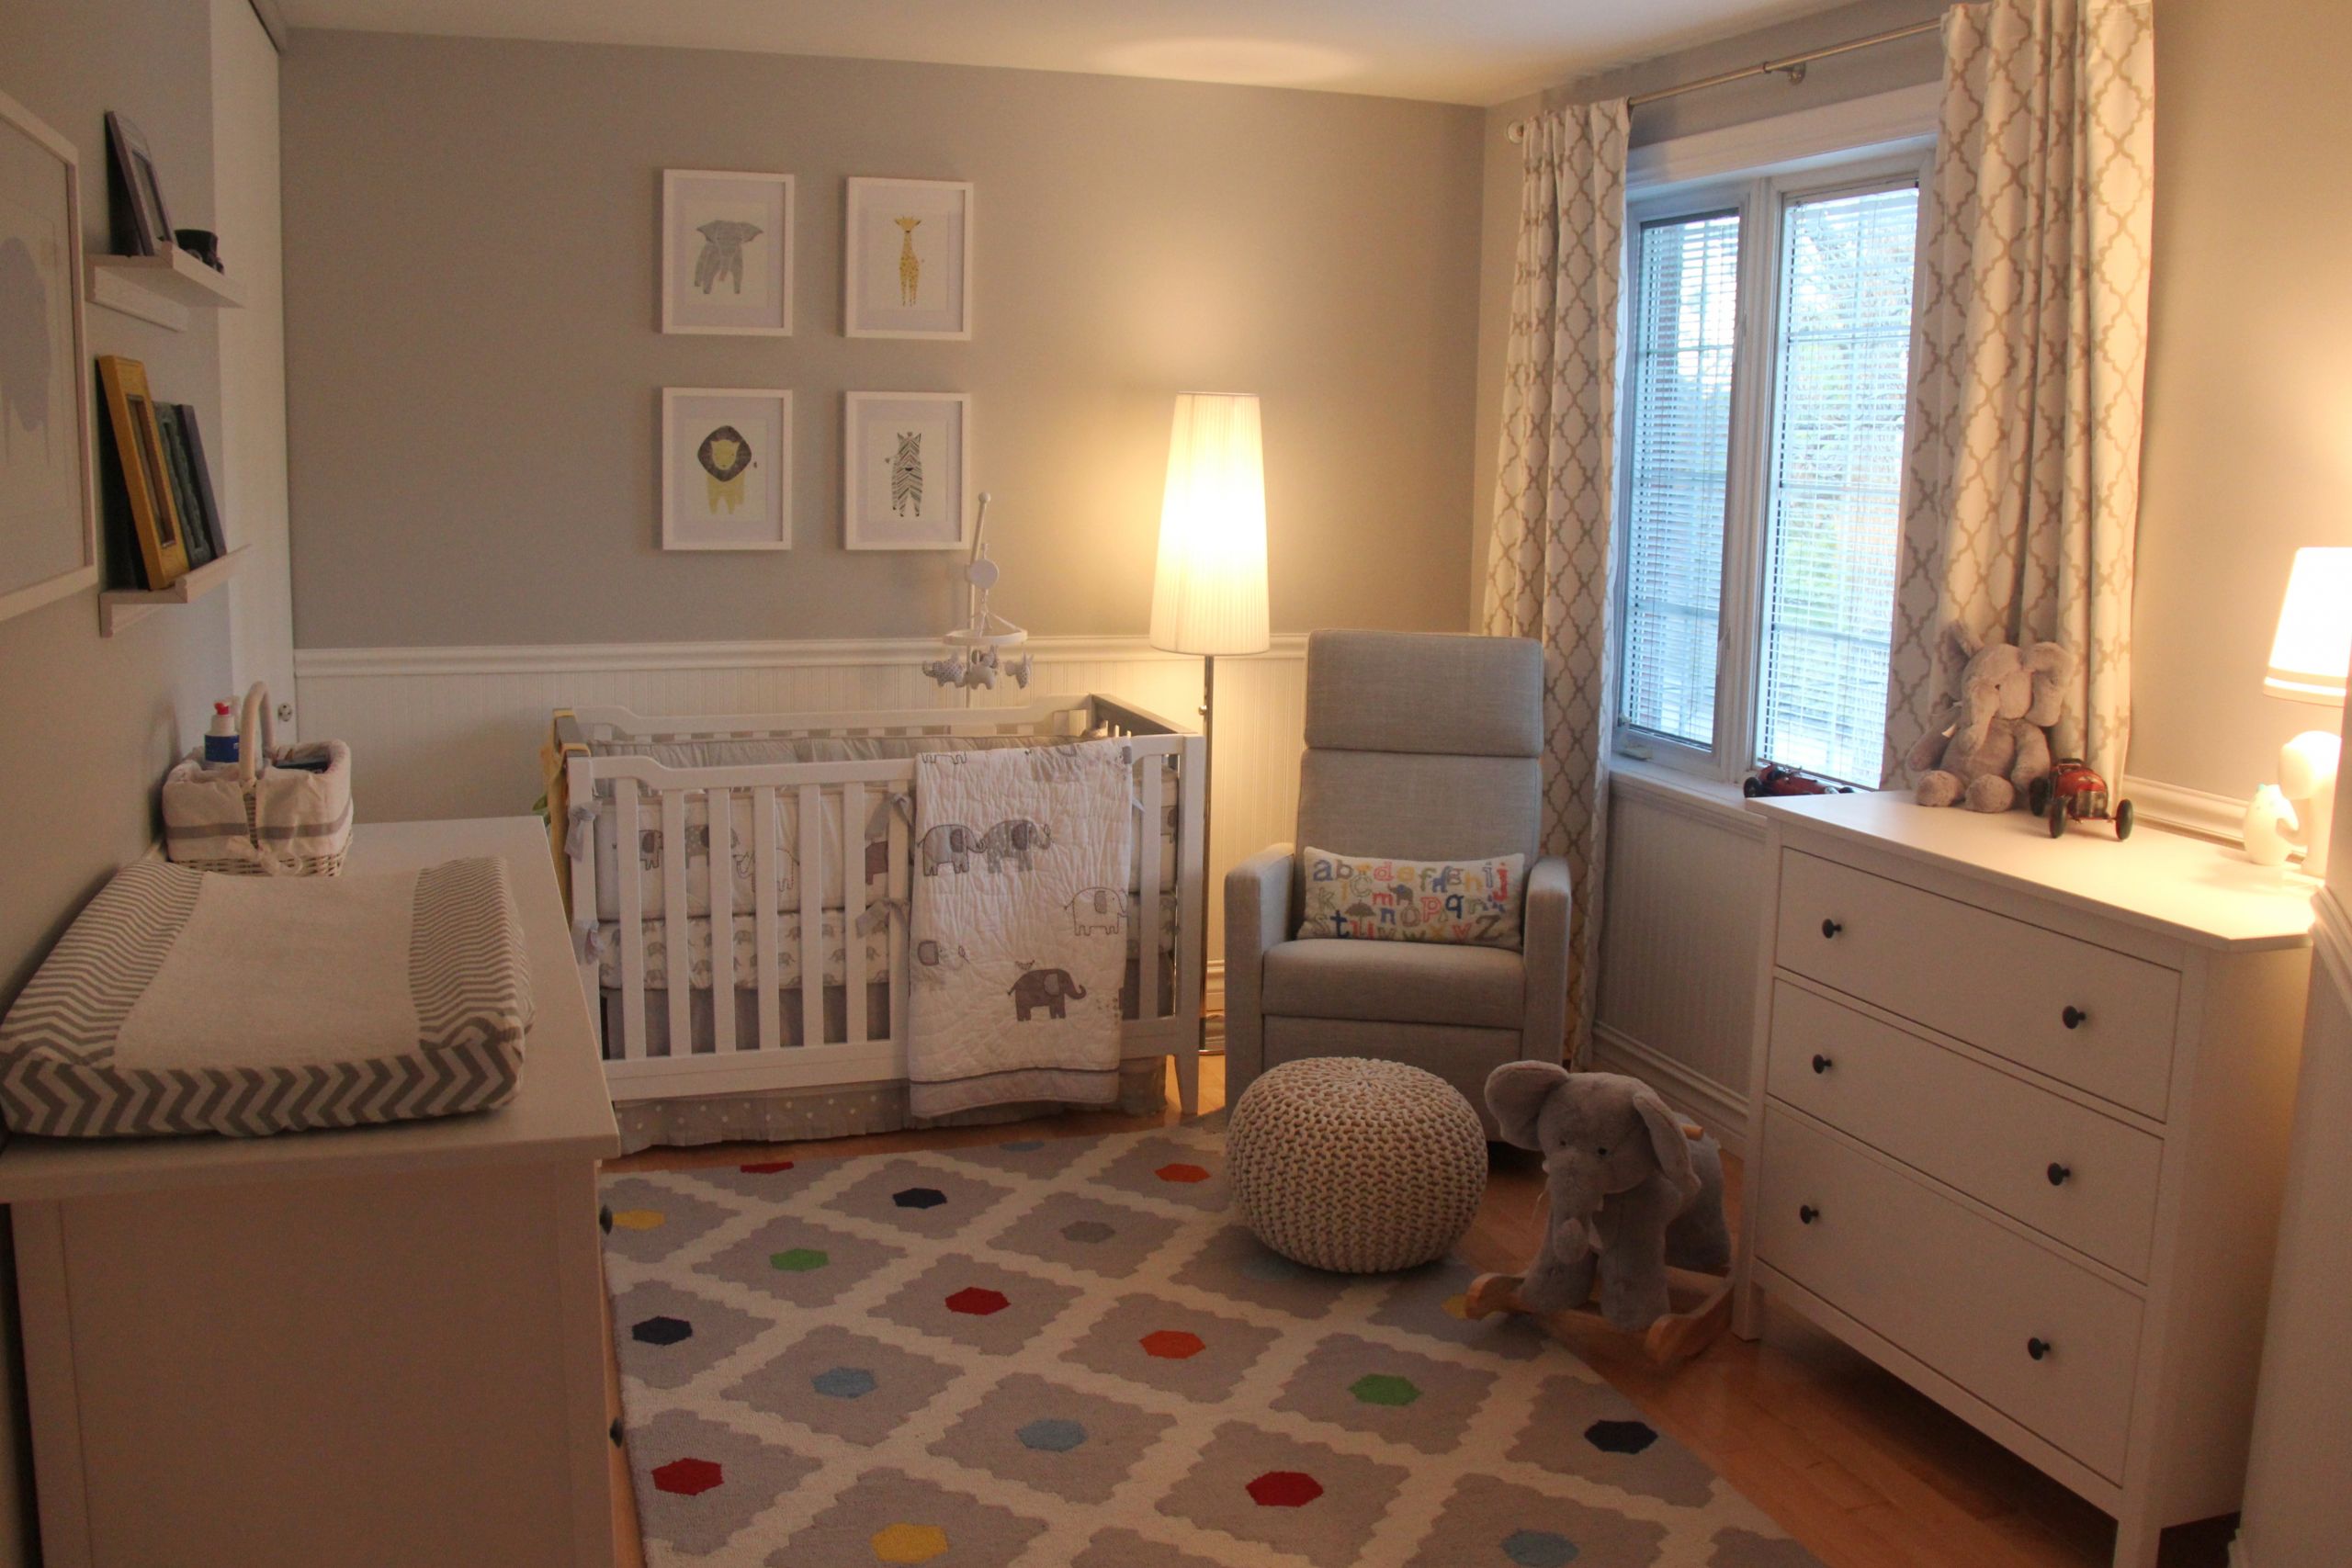 Baby Bedroom Decoration
 Our Little Baby Boy s Neutral Room Project Nursery